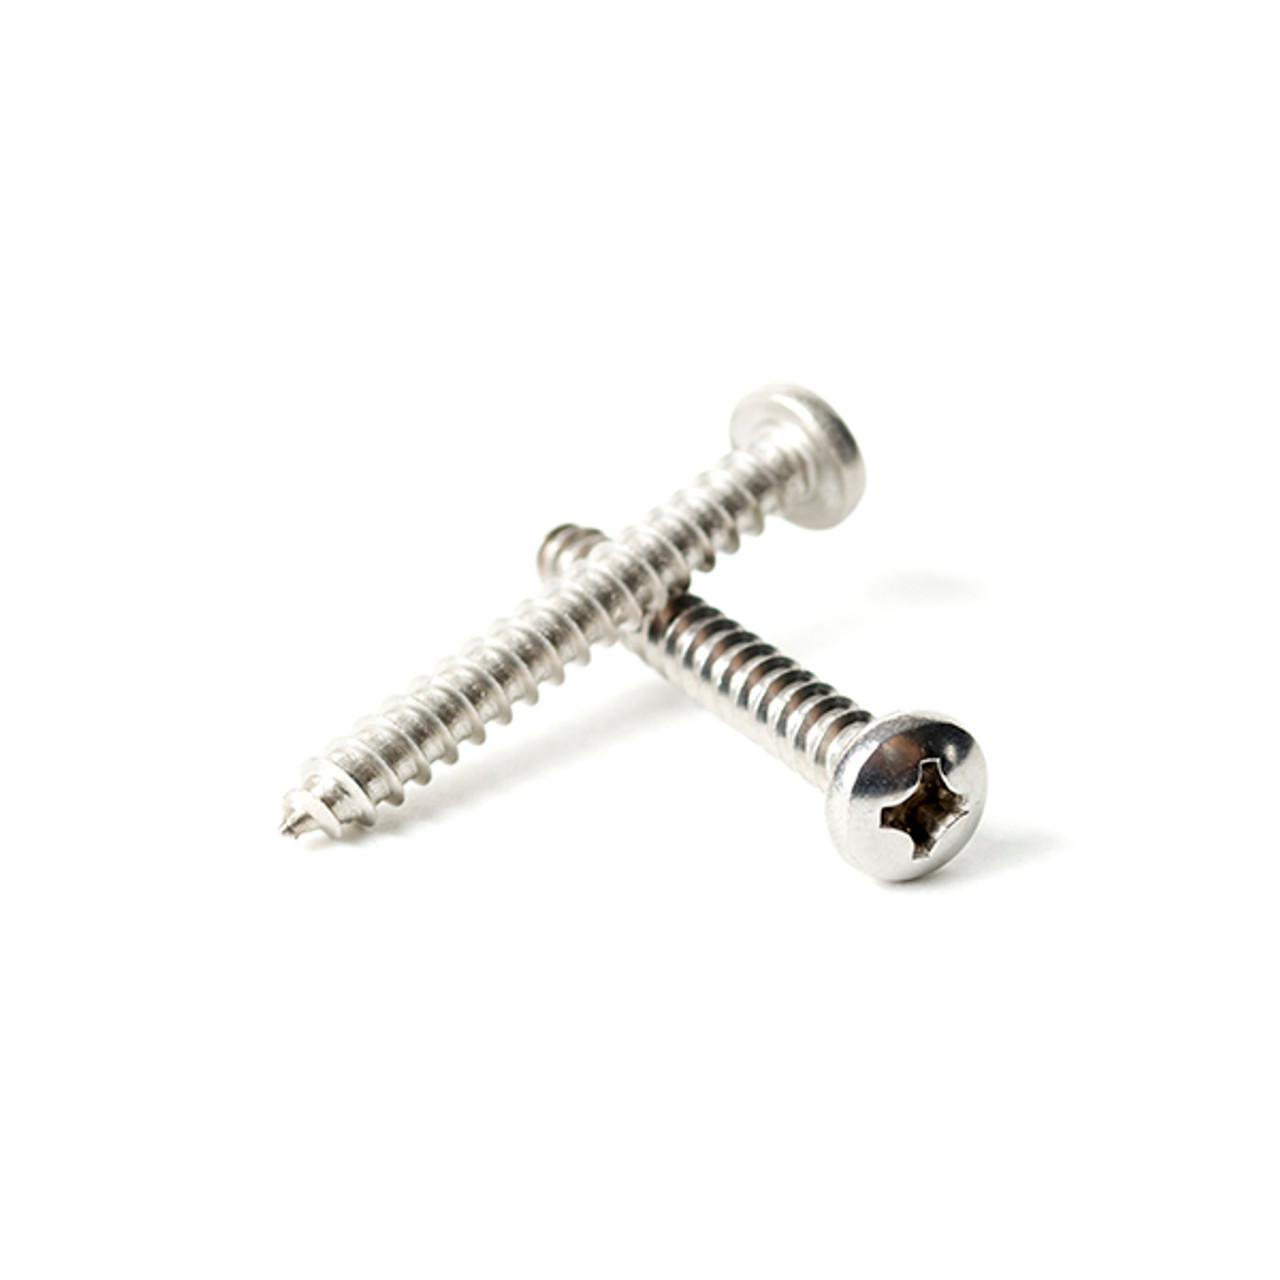 Pan Head Phillips Self-tapping Screw